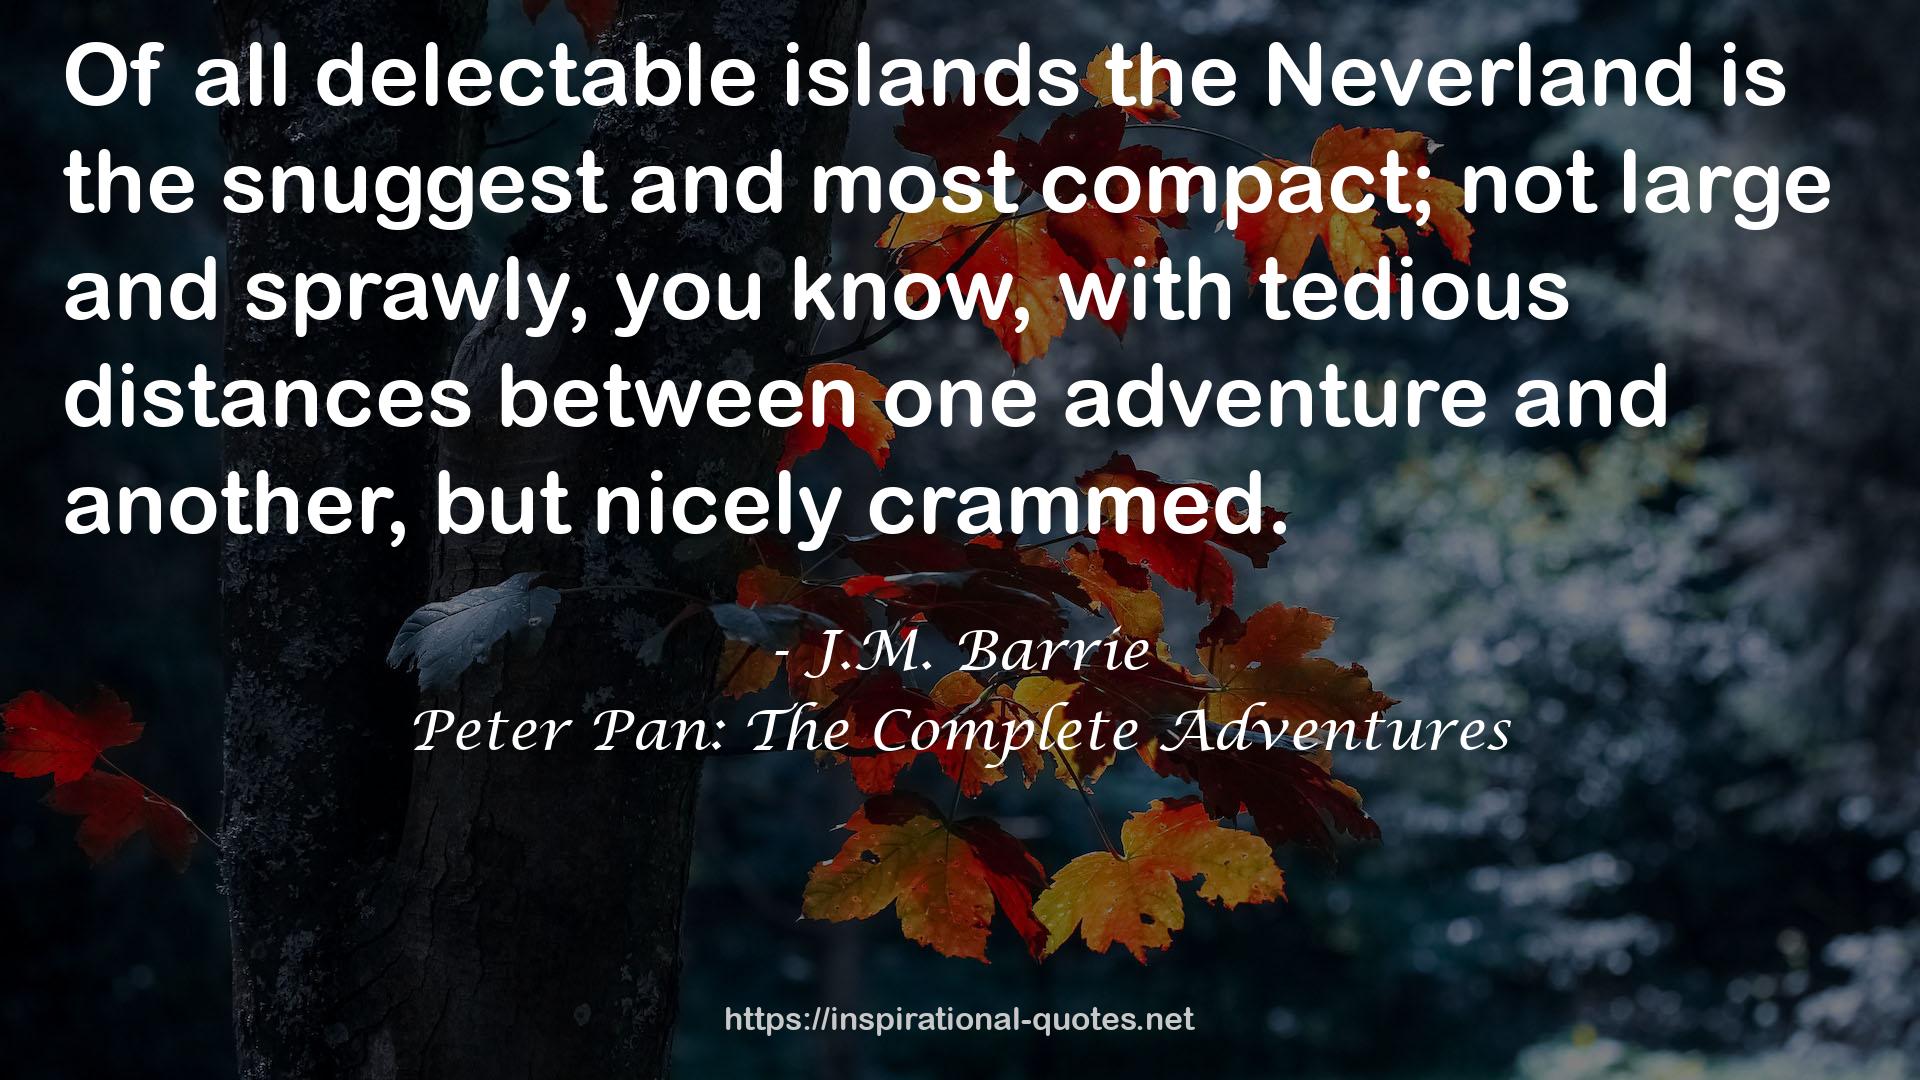 Peter Pan: The Complete Adventures QUOTES